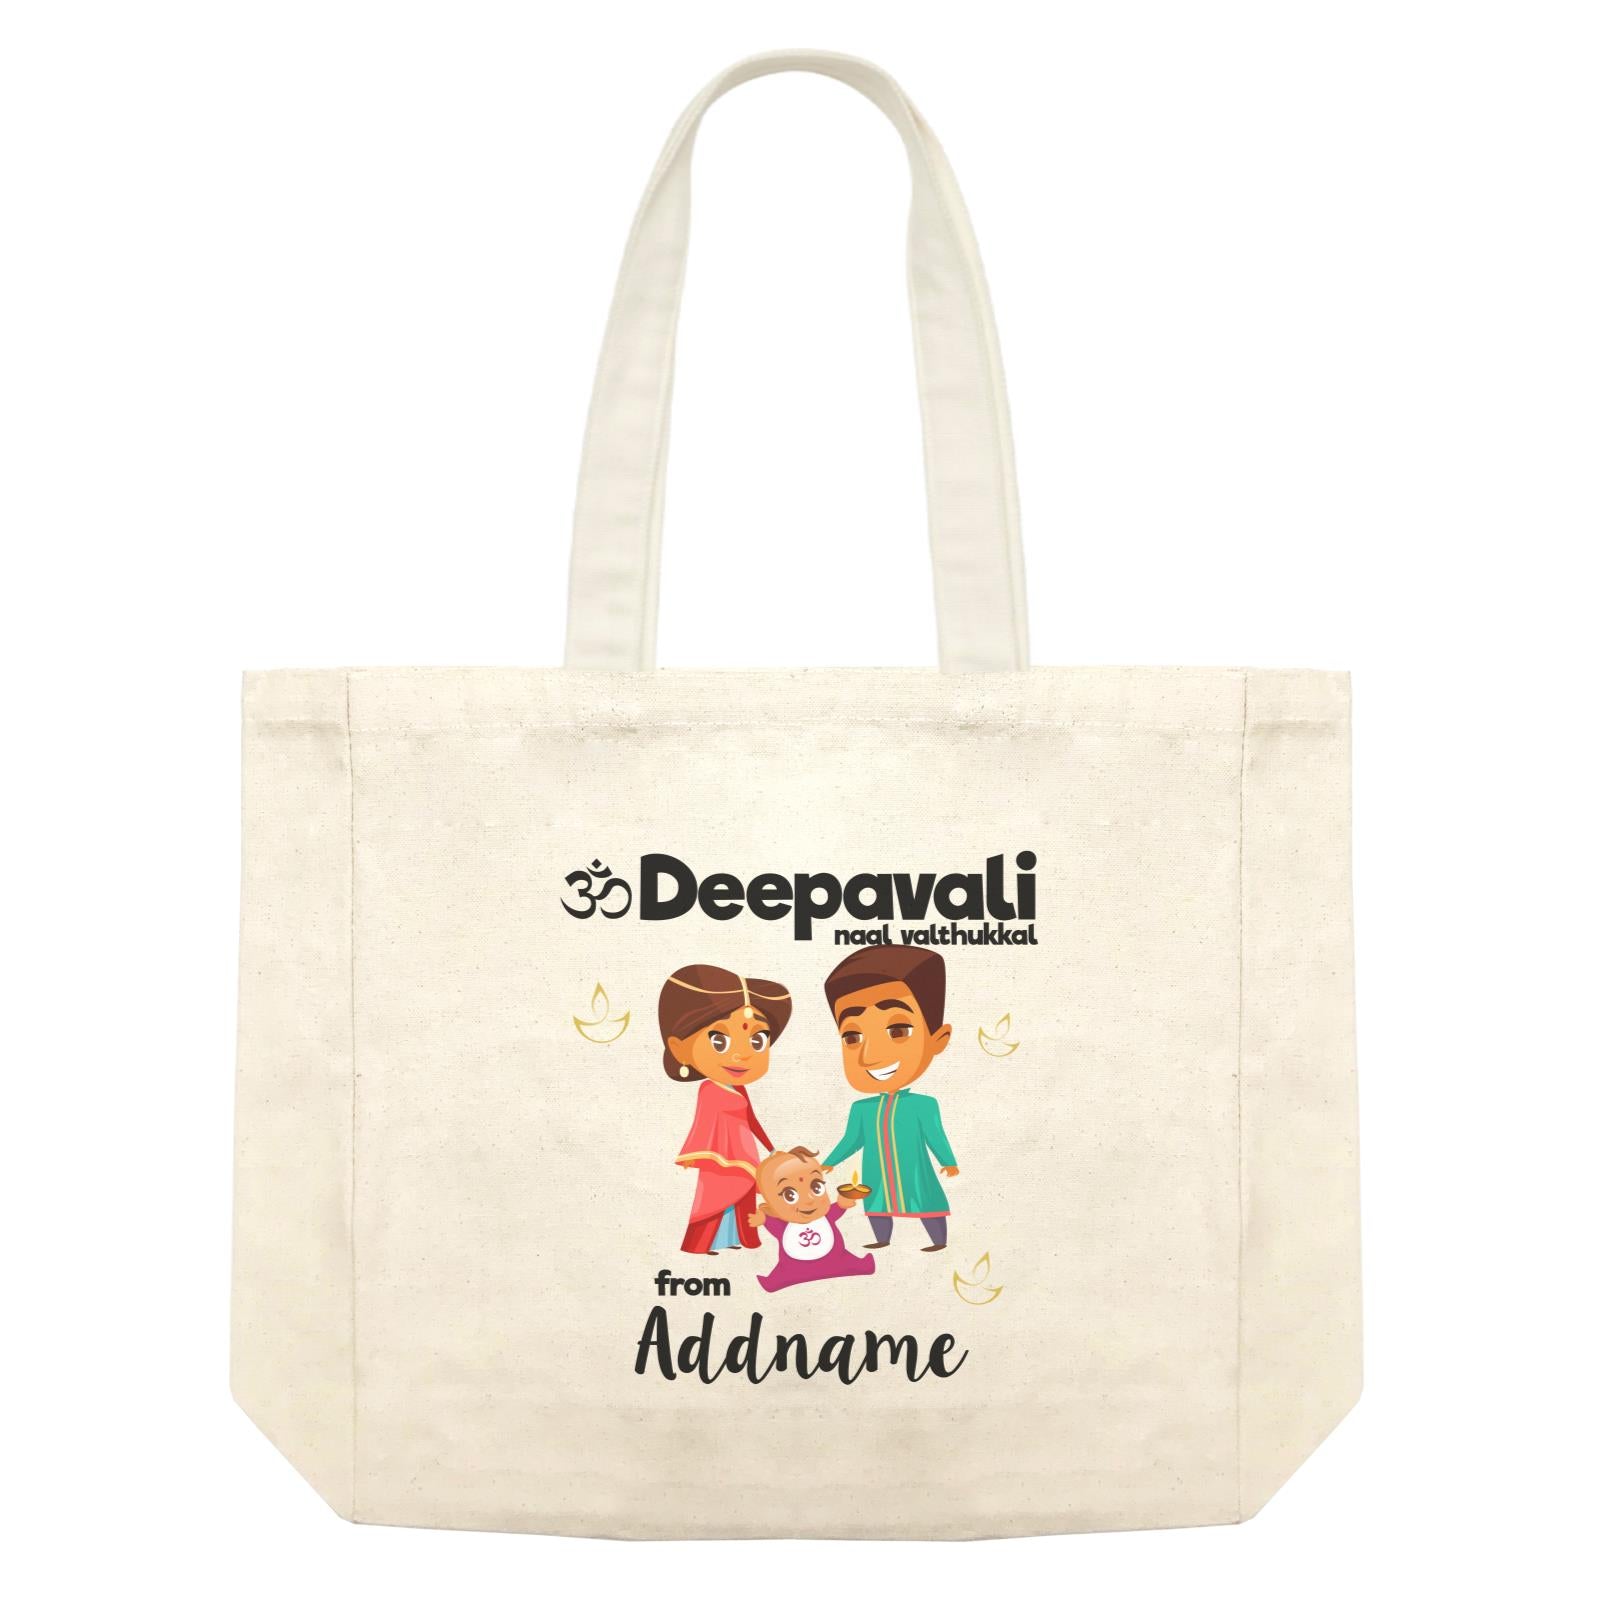 Cute Family Of Three OM Deepavali From Addname Shopping Bag